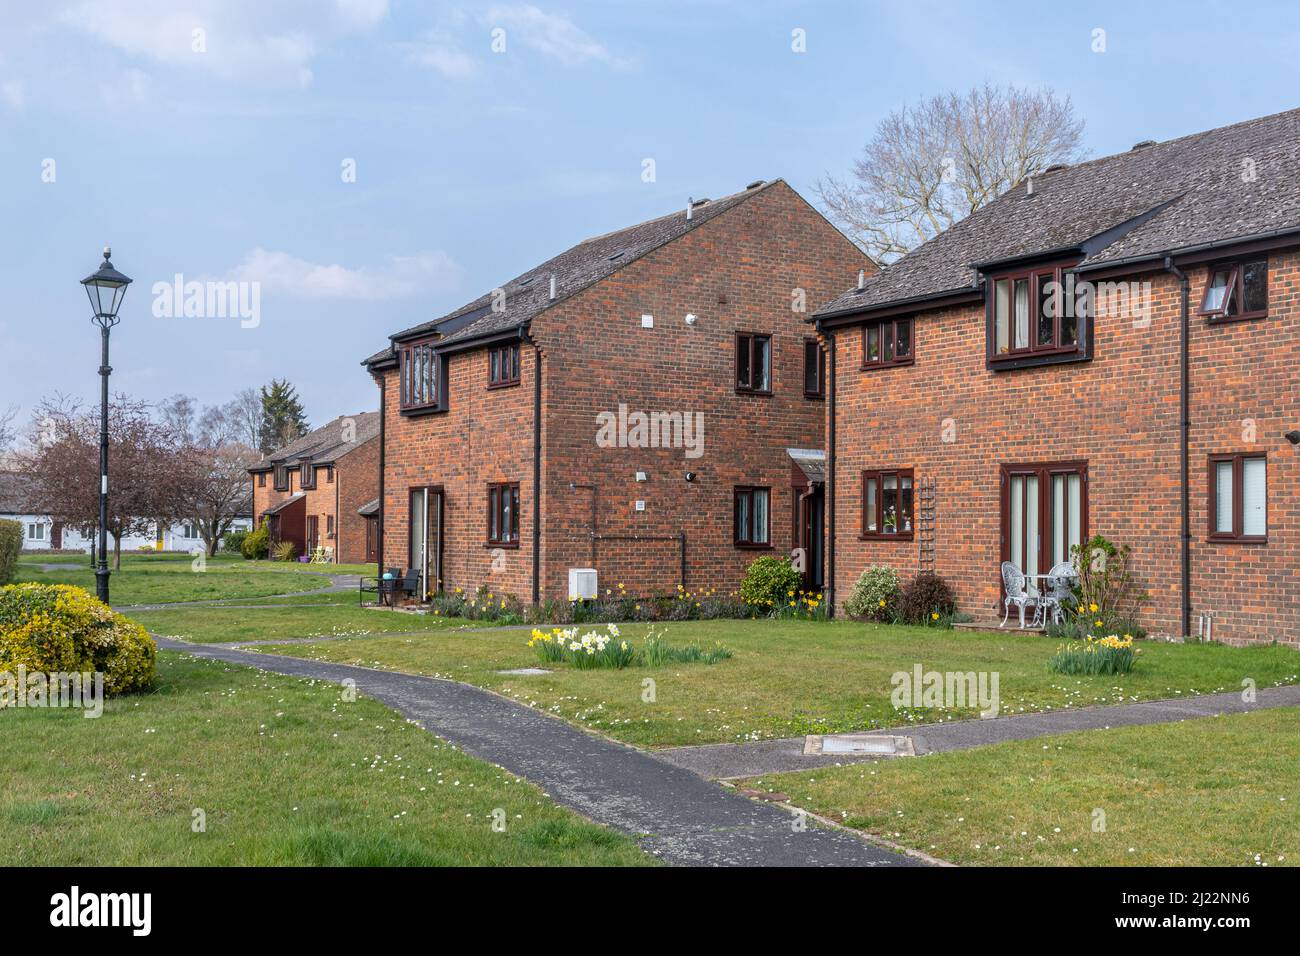 New houses on Chiltlee Manor Estate with lawns and gardens, Liphook village, Hampshire, England, UK Stock Photo